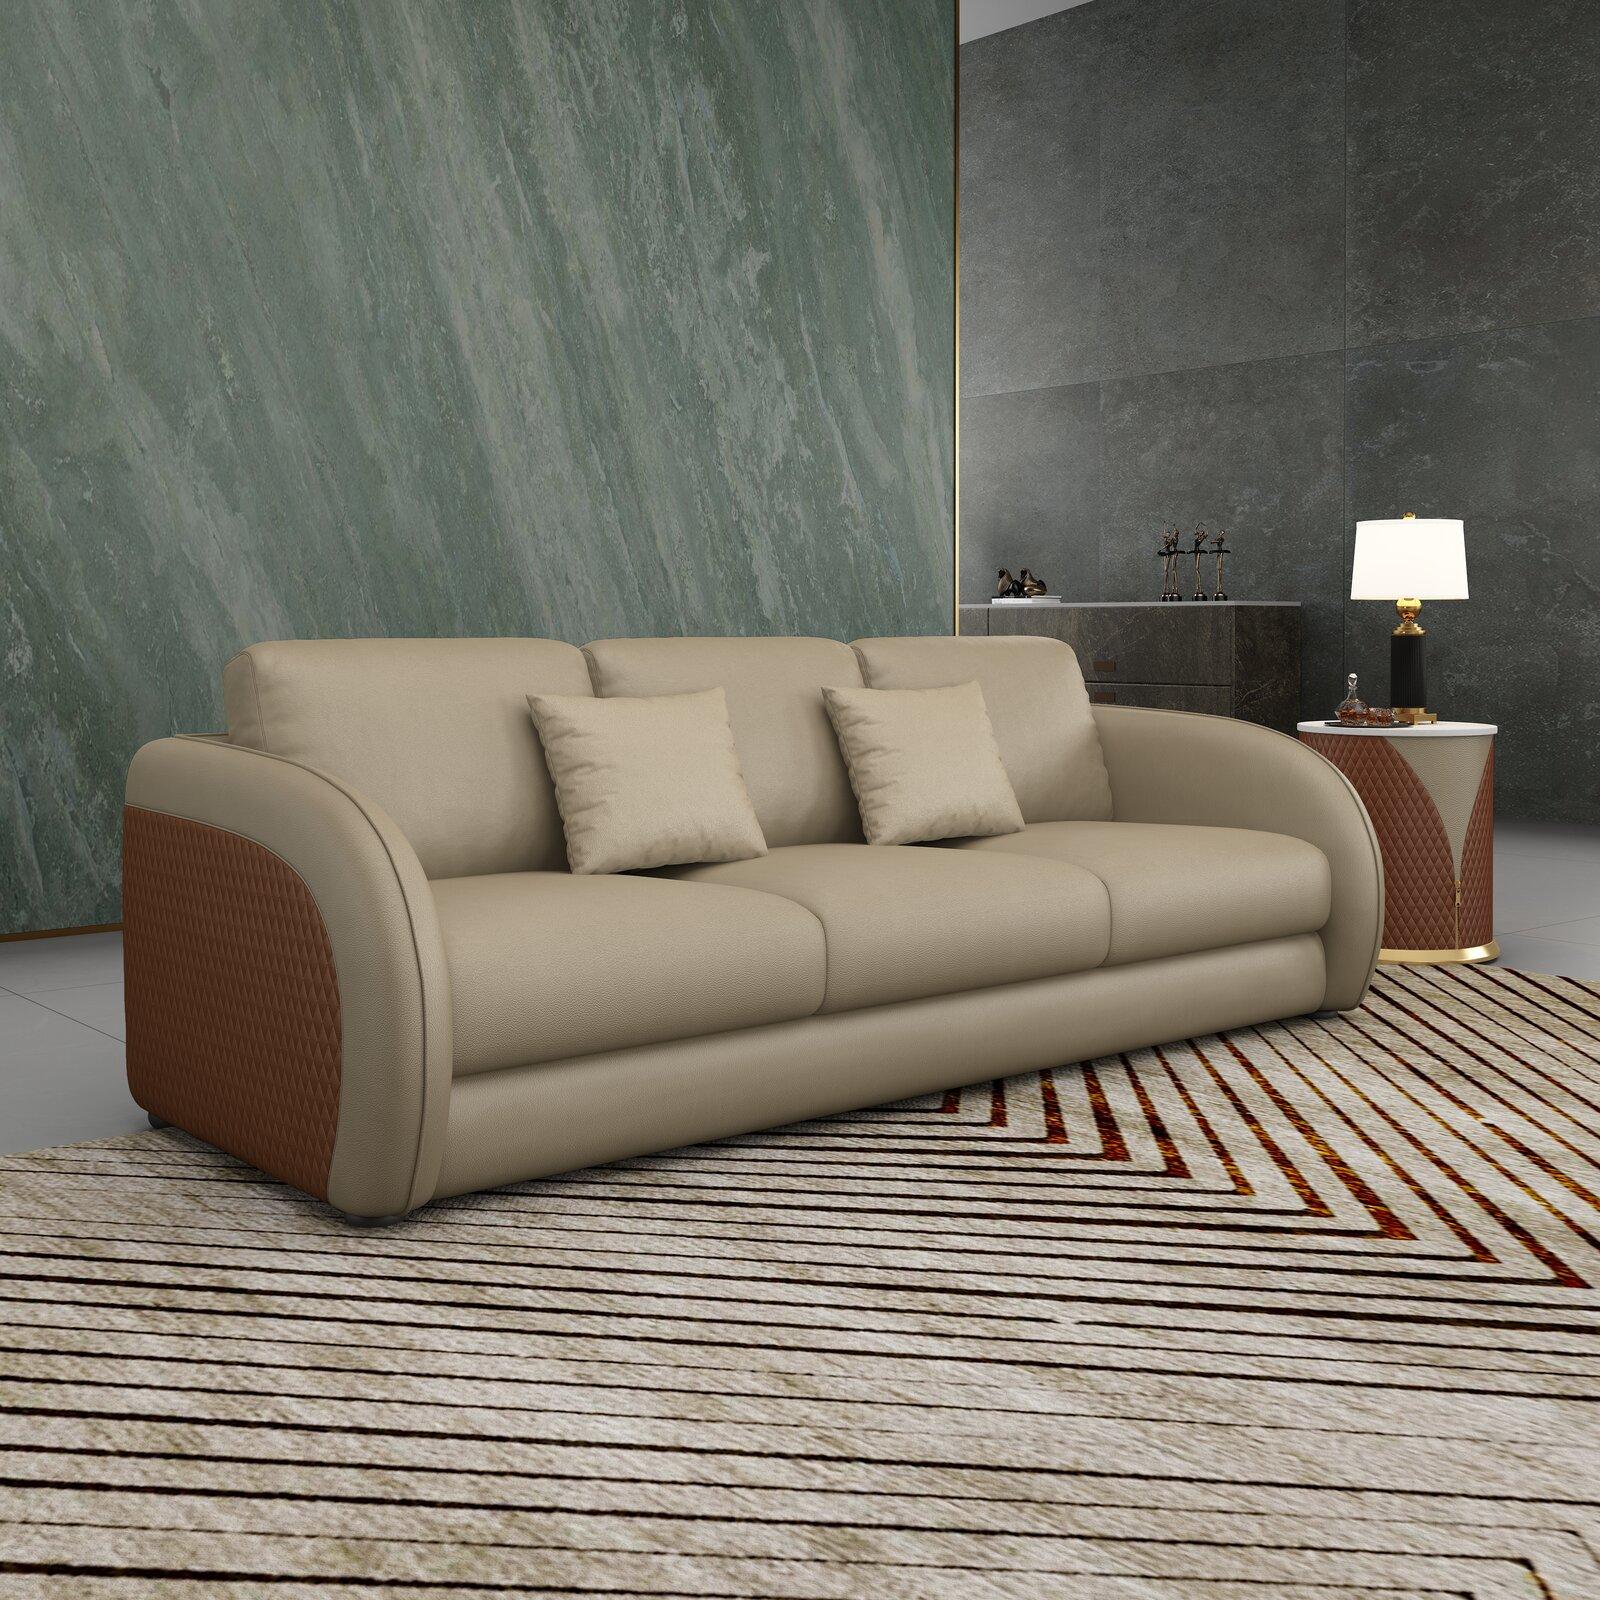 Contemporary, Modern Sofa NOIR EF-90880-S in Brown, Beige Leather